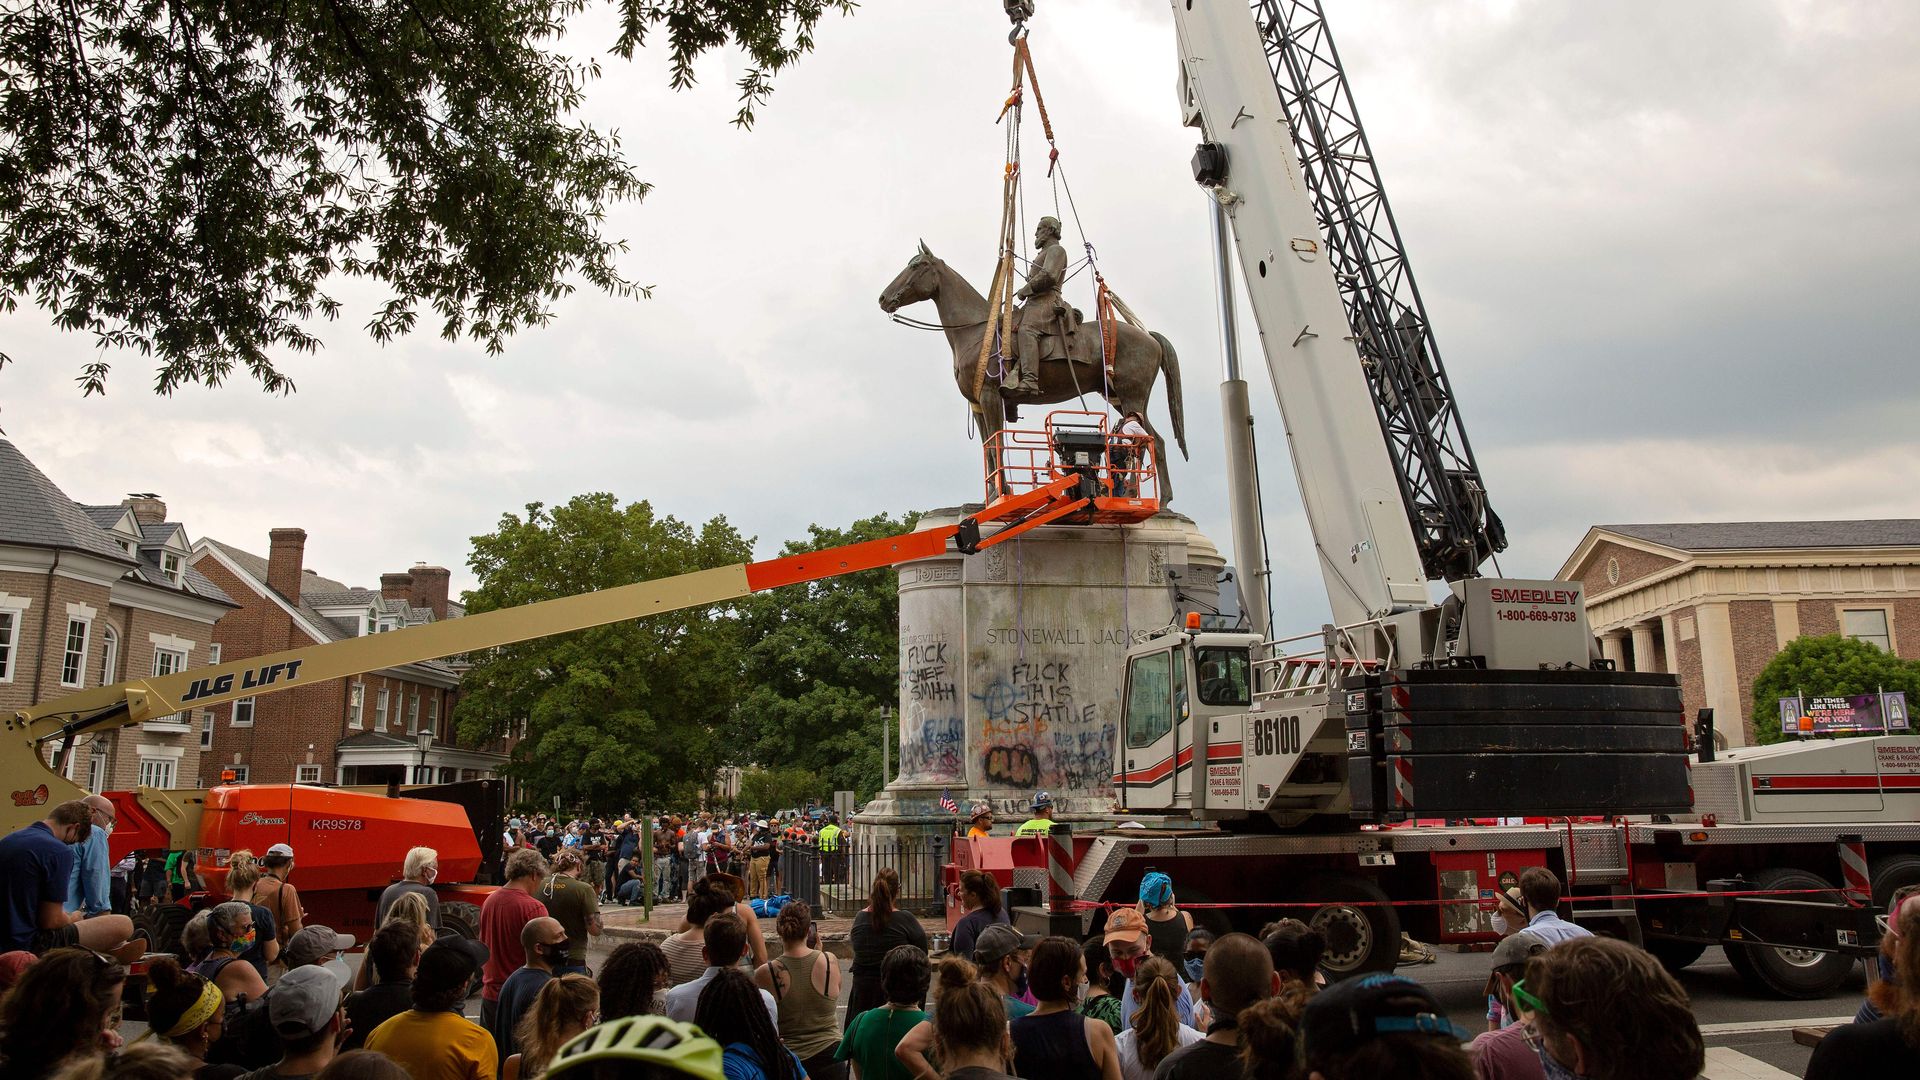 People watch as the Stonewall Jackson statue is removed from Monument Avenue in Richmond, Virginia on July 1, 2020. - Workers in Richmond, Virginia, removed a statue of Thomas "Stonewall" Jackson, a Confederate general, after the city's mayor ordered the "immediate removal" of Confederate monuments.